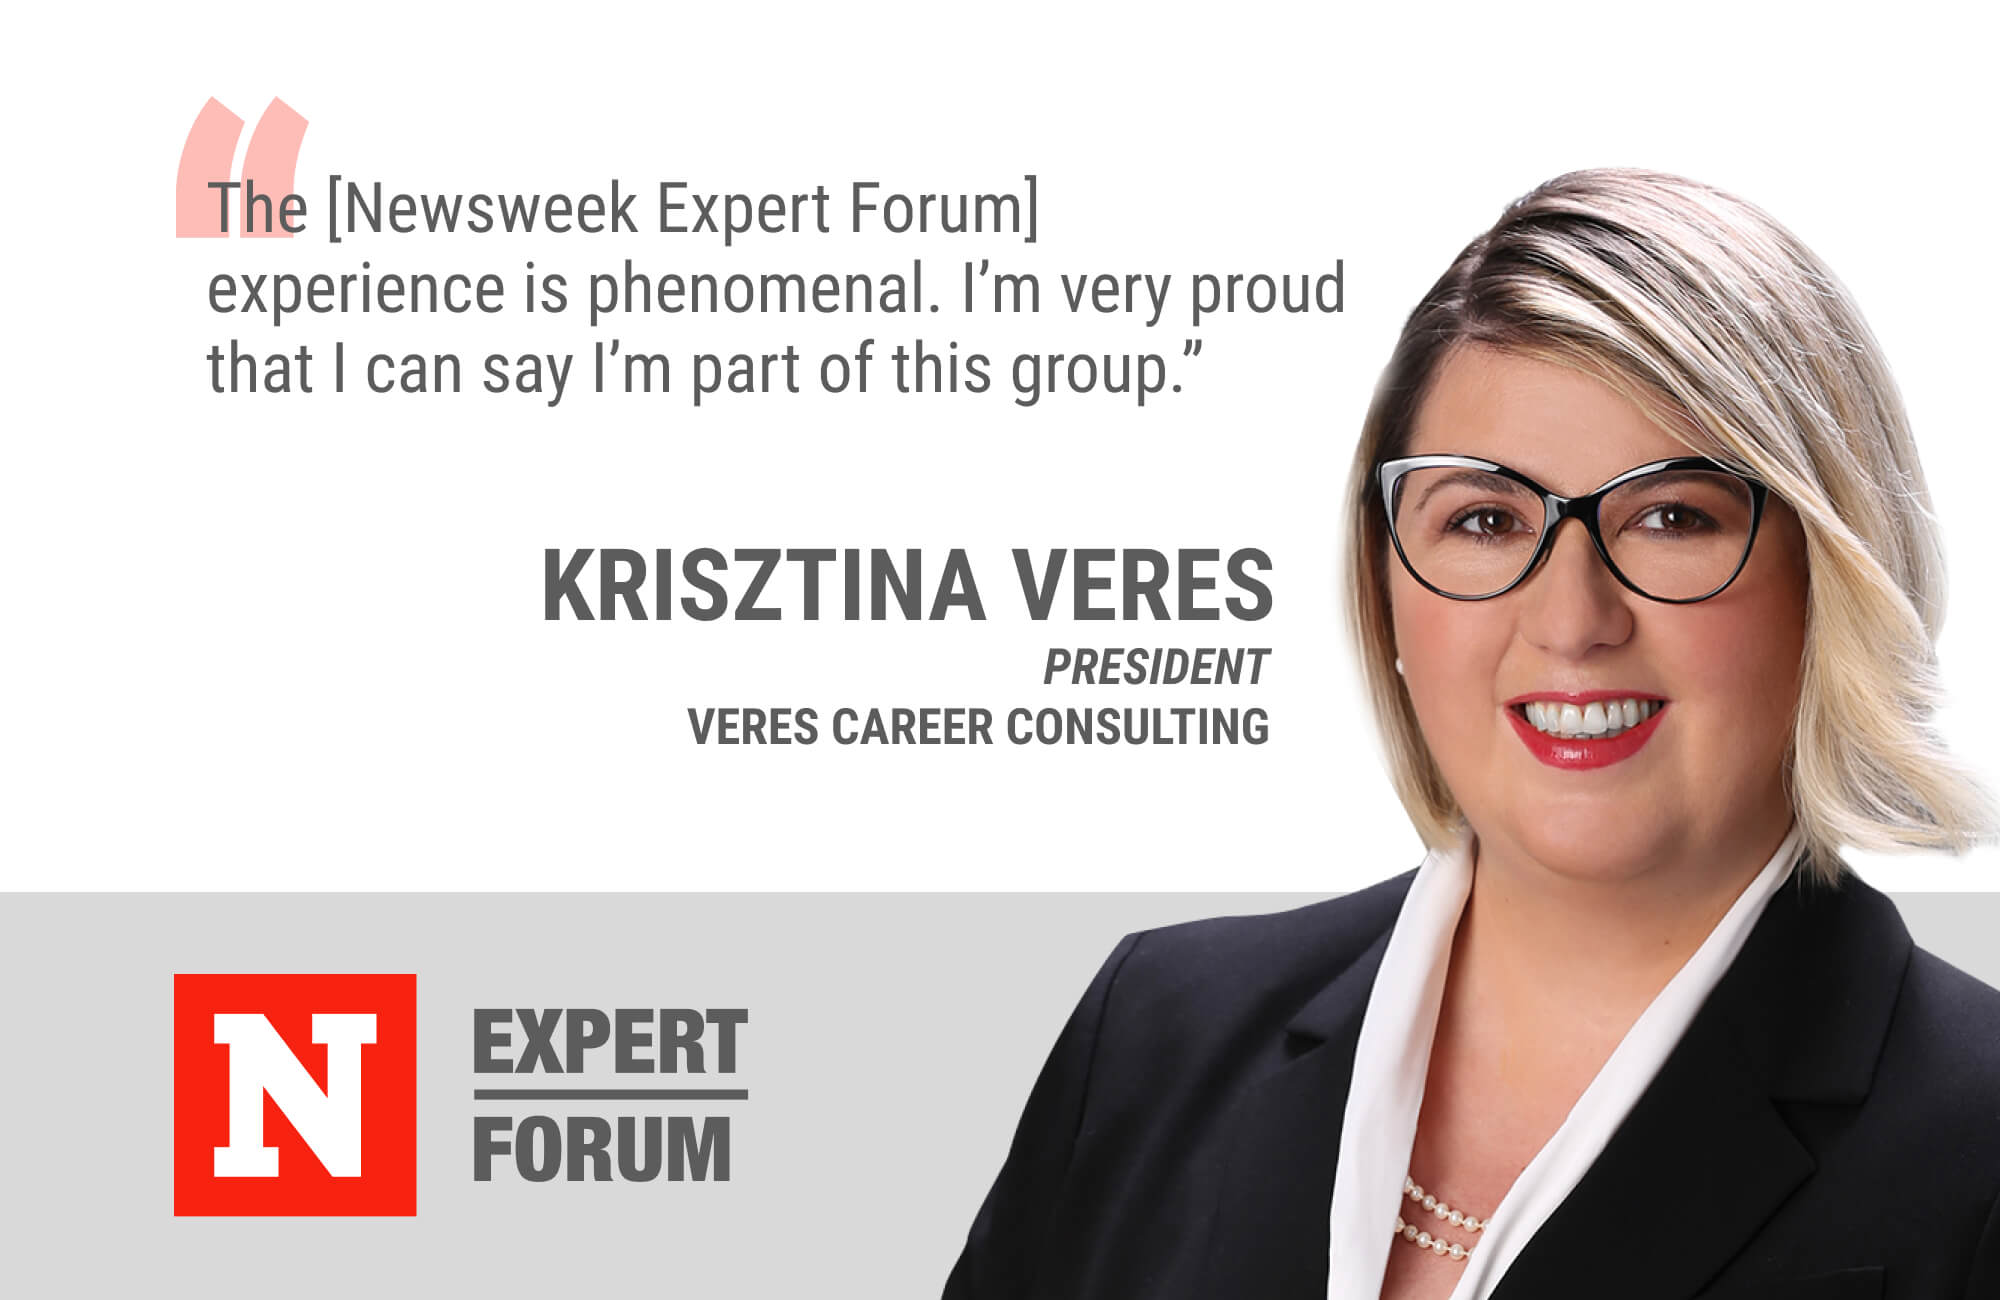 Krisztina Veres Gathers Valuable Industry Information From Newsweek Expert Forum Community